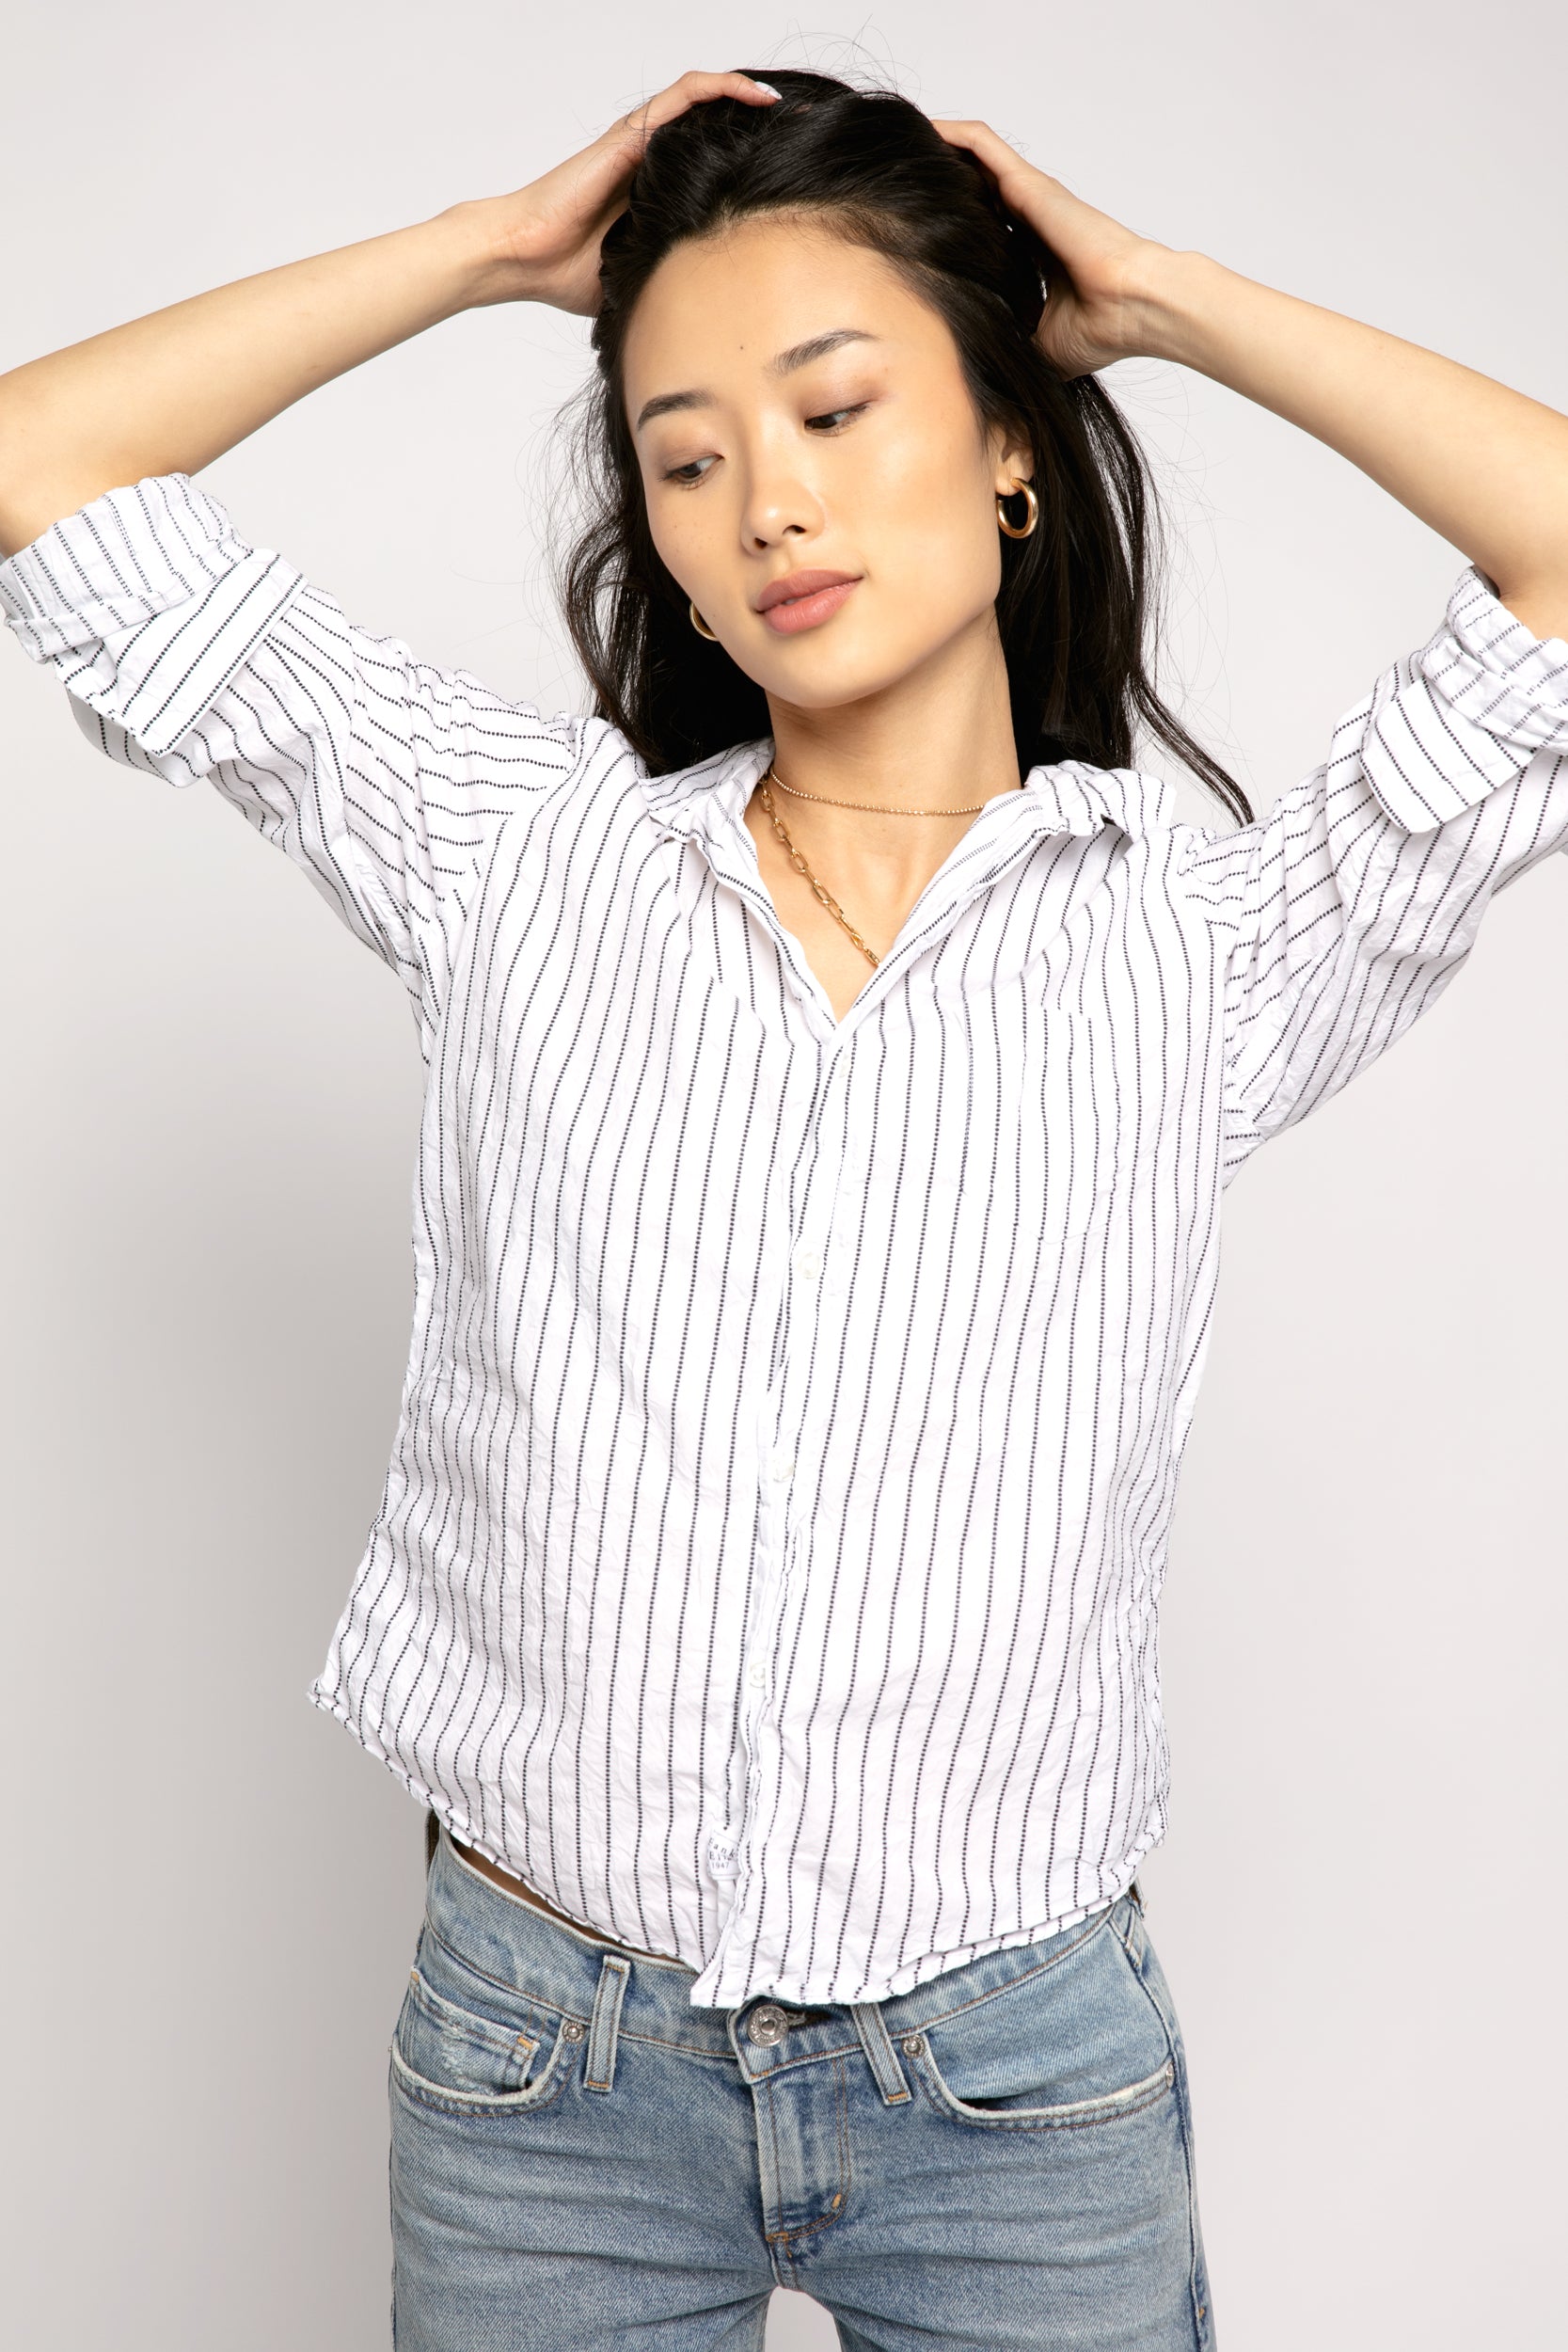 FRANK & EILEEN Barry Button Down Shirt in Black Dotted Stripe